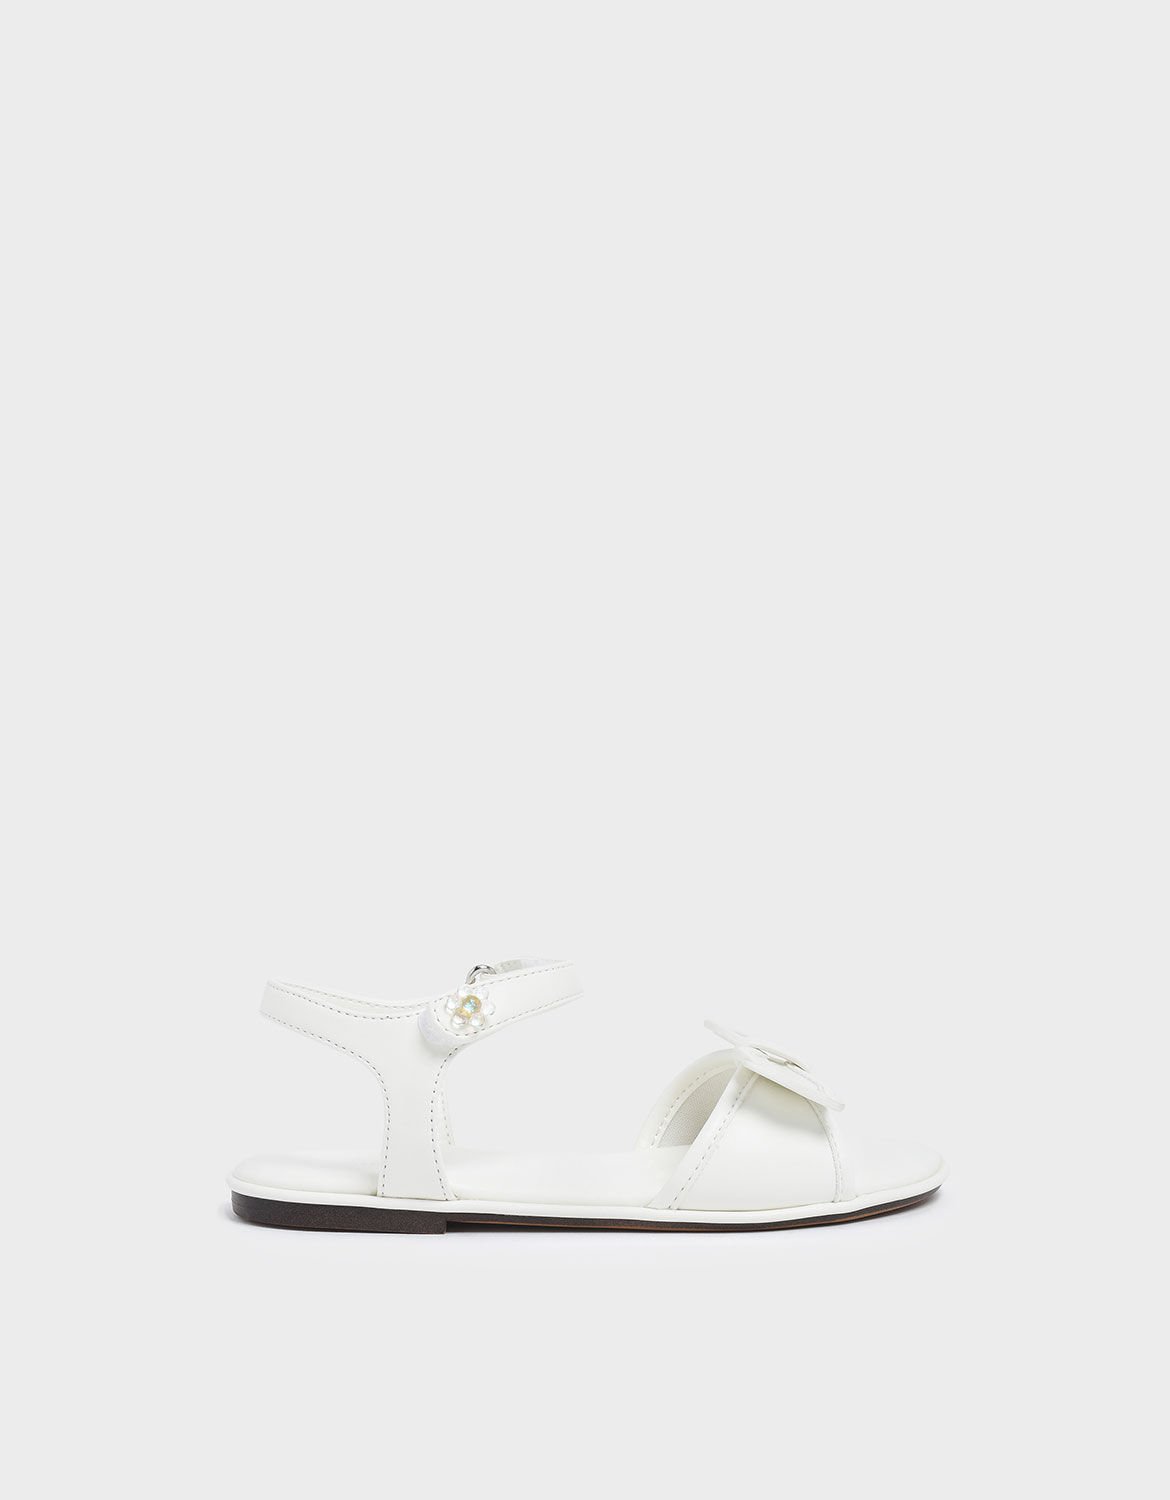 Open Toe Sandals | CHARLES \u0026 KEITH USD